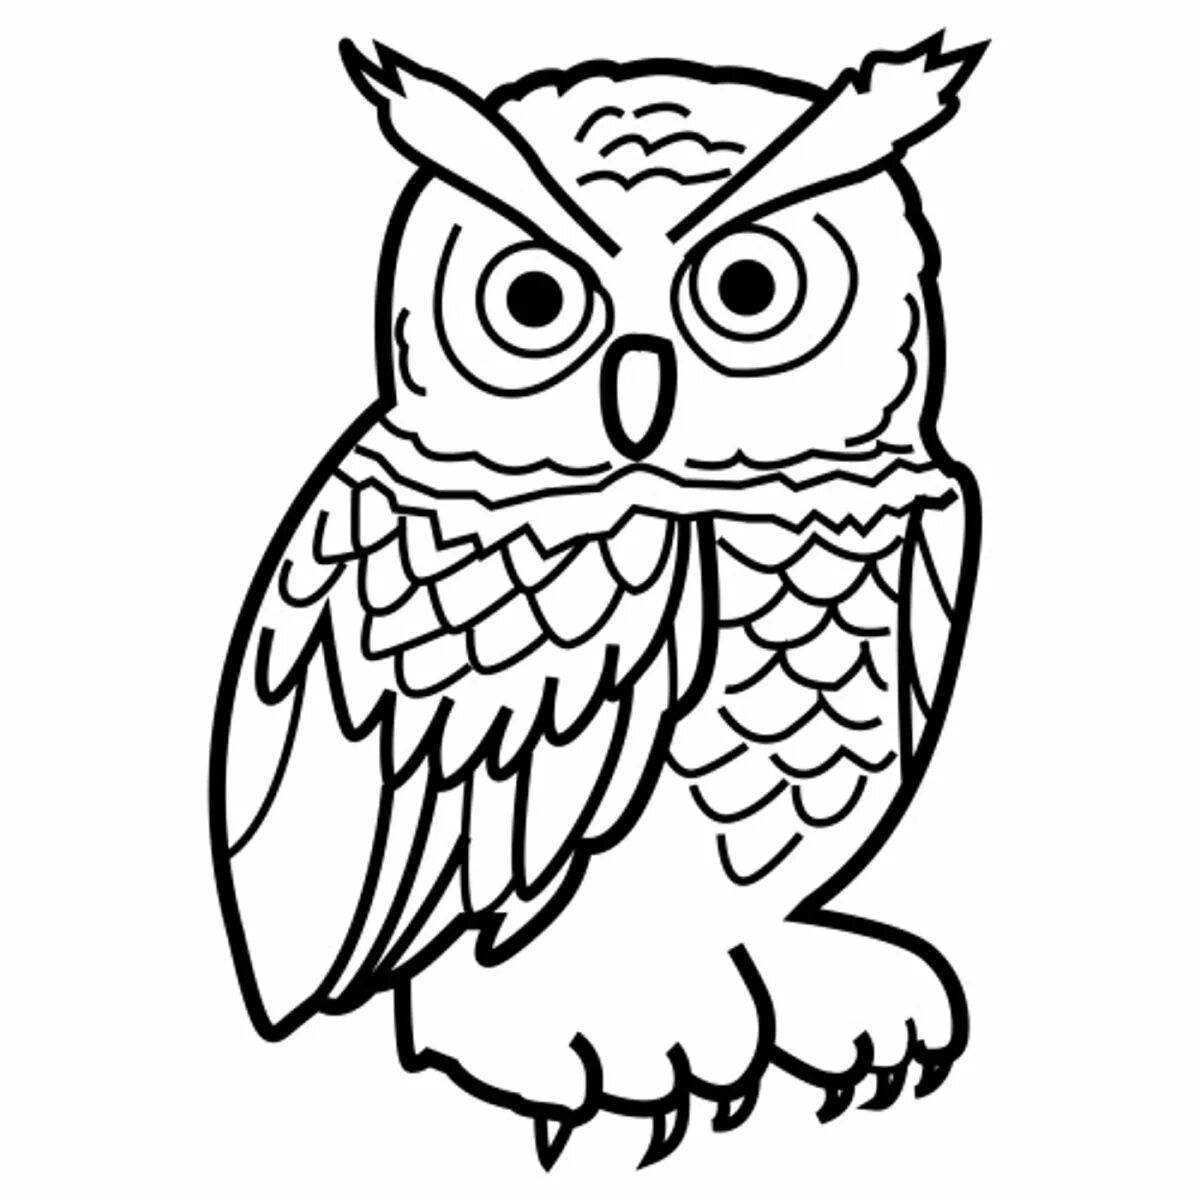 Outstanding owl coloring page for kids